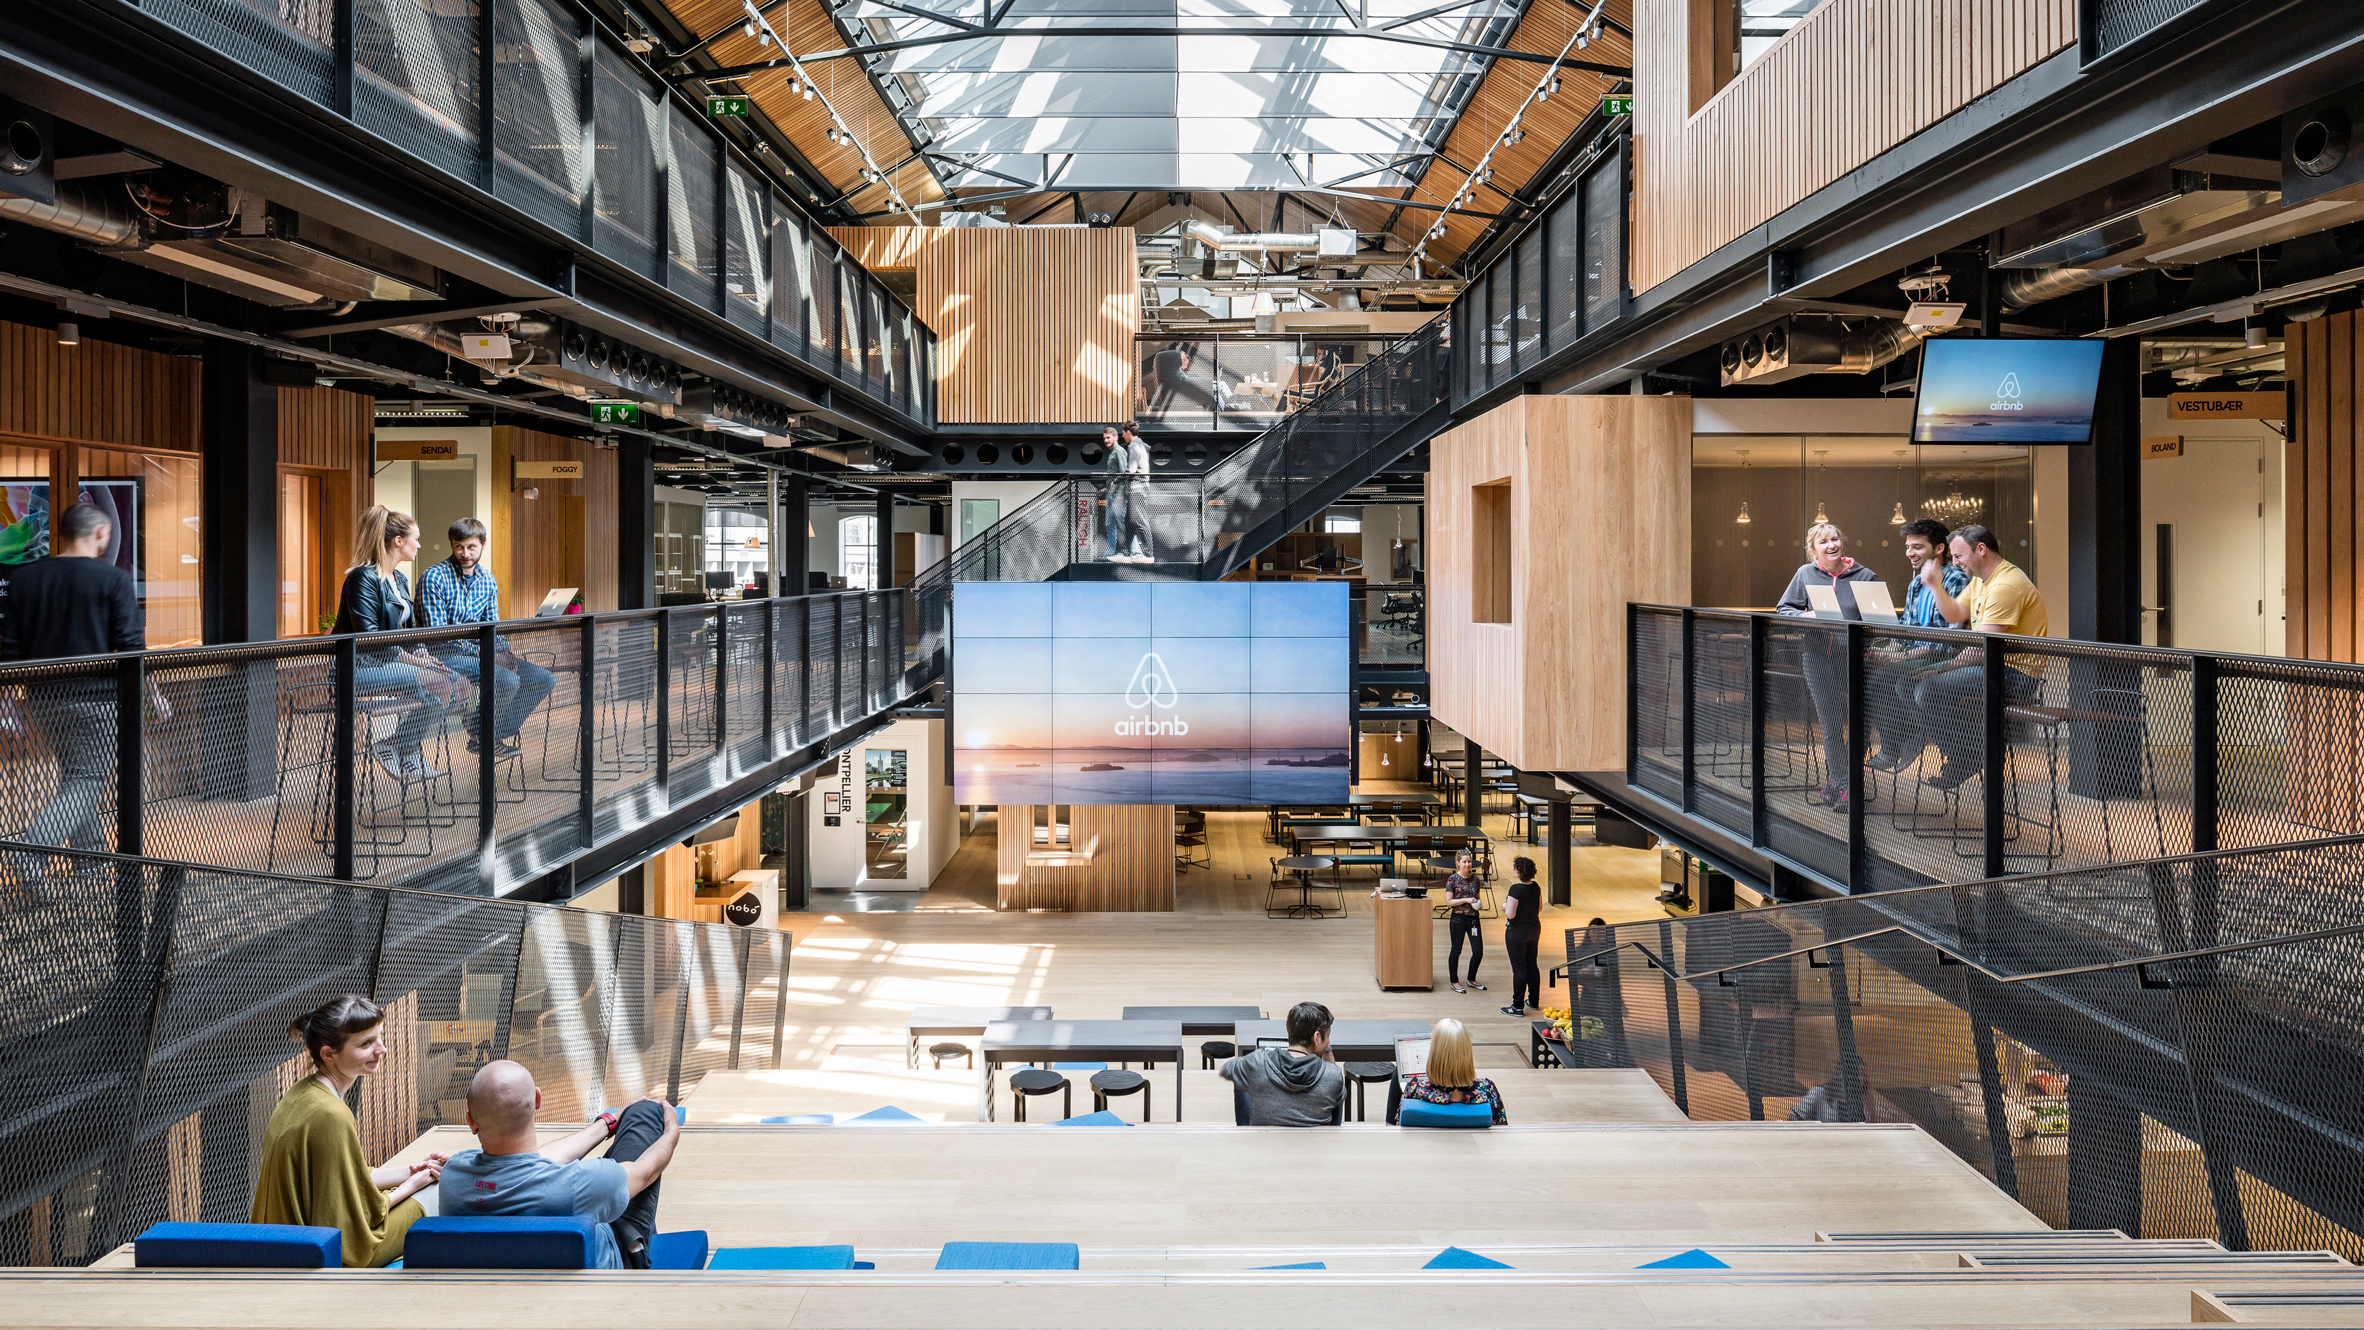 Airbnb unveils new headquarters in a disused Dublin warehouse